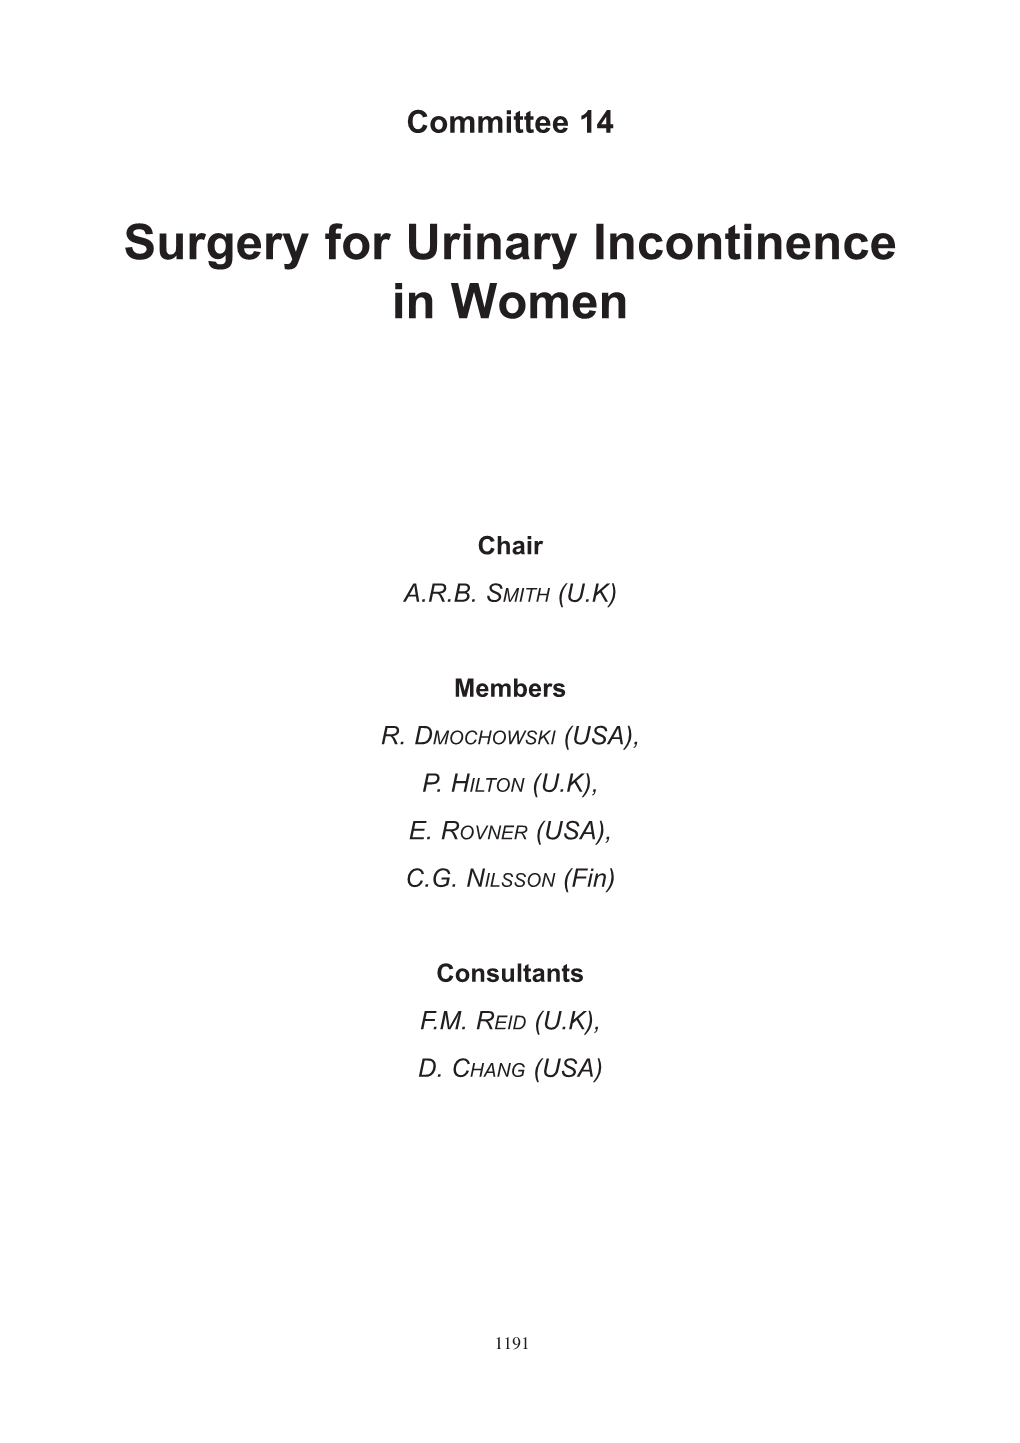 Surgery for Urinary Incontinence in Women